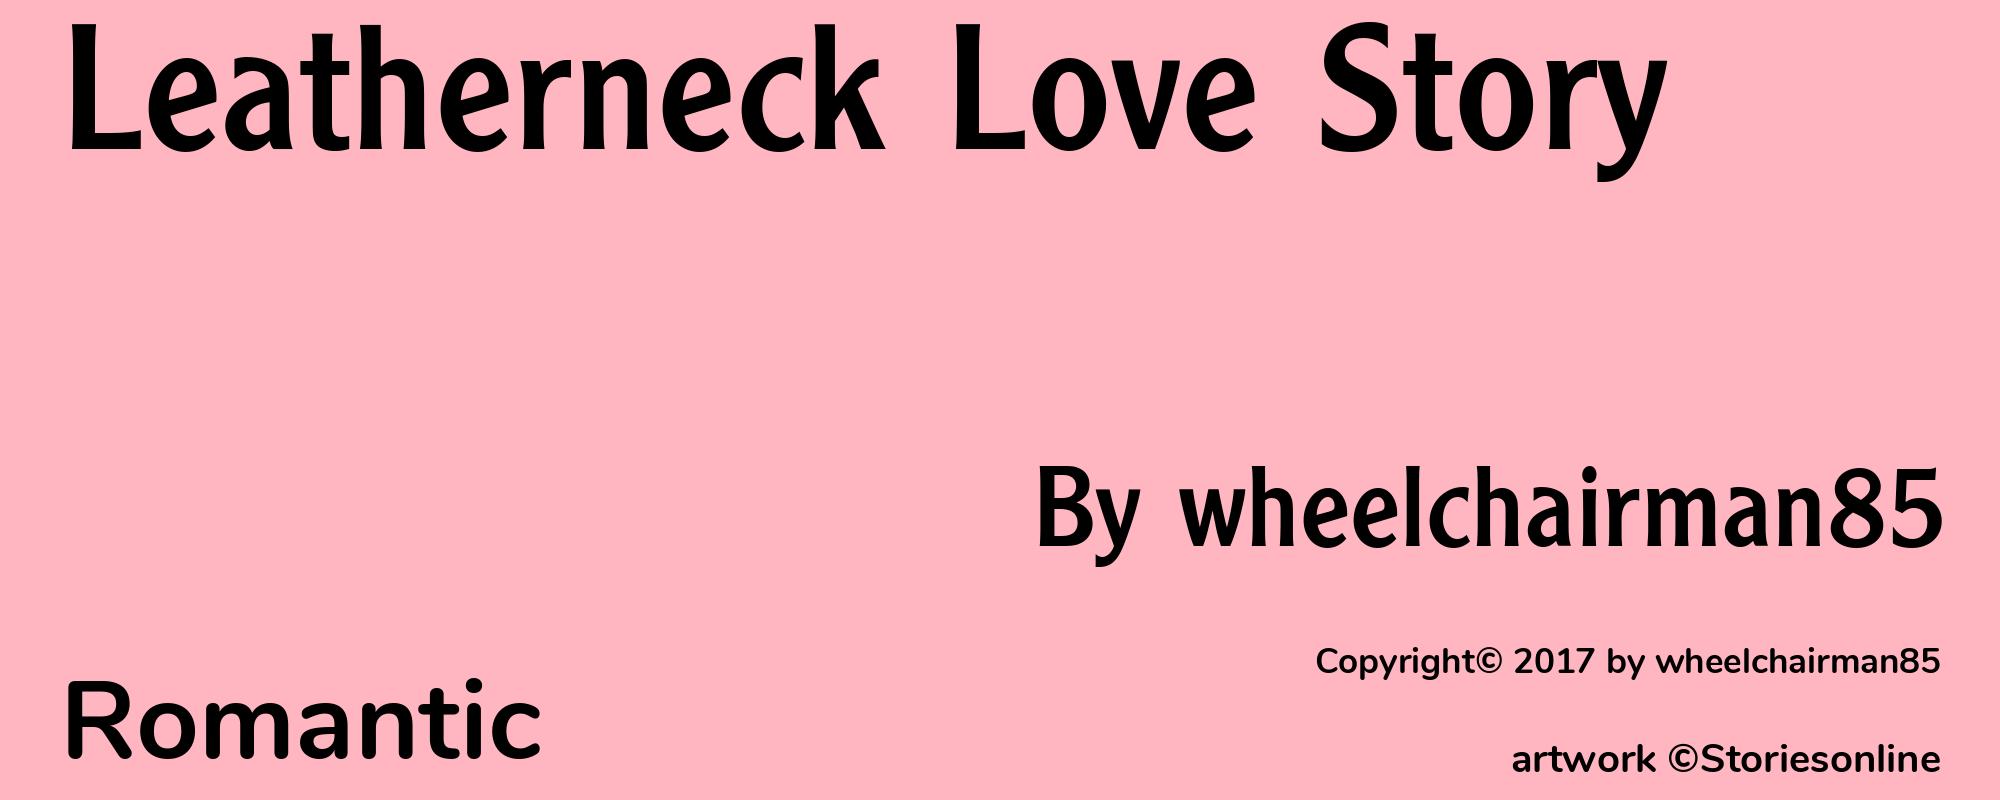 Leatherneck Love Story - Cover